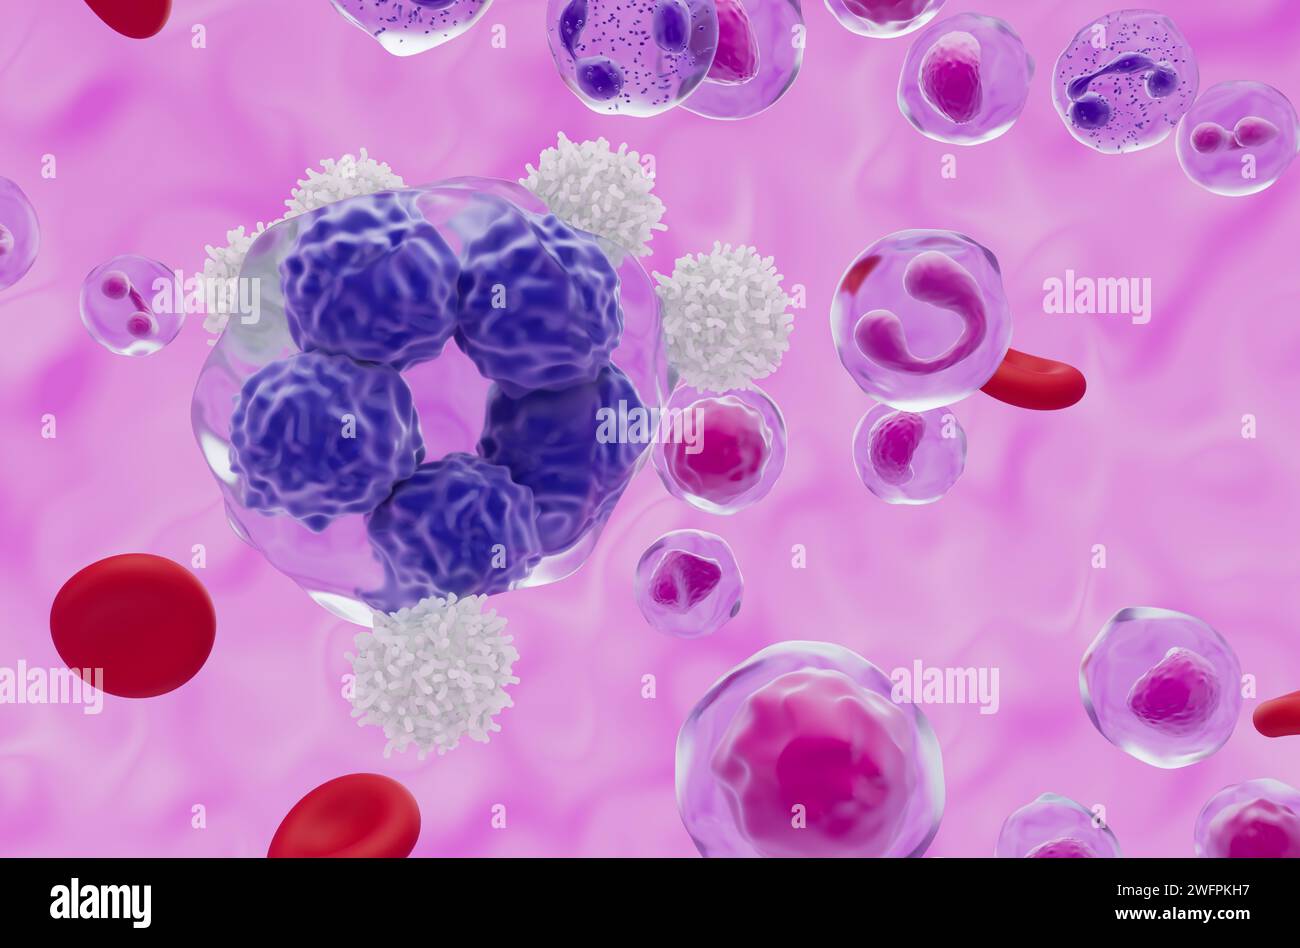 White blood cells with T-cell lymphoma - closeup view 3d illustration Stock Photo